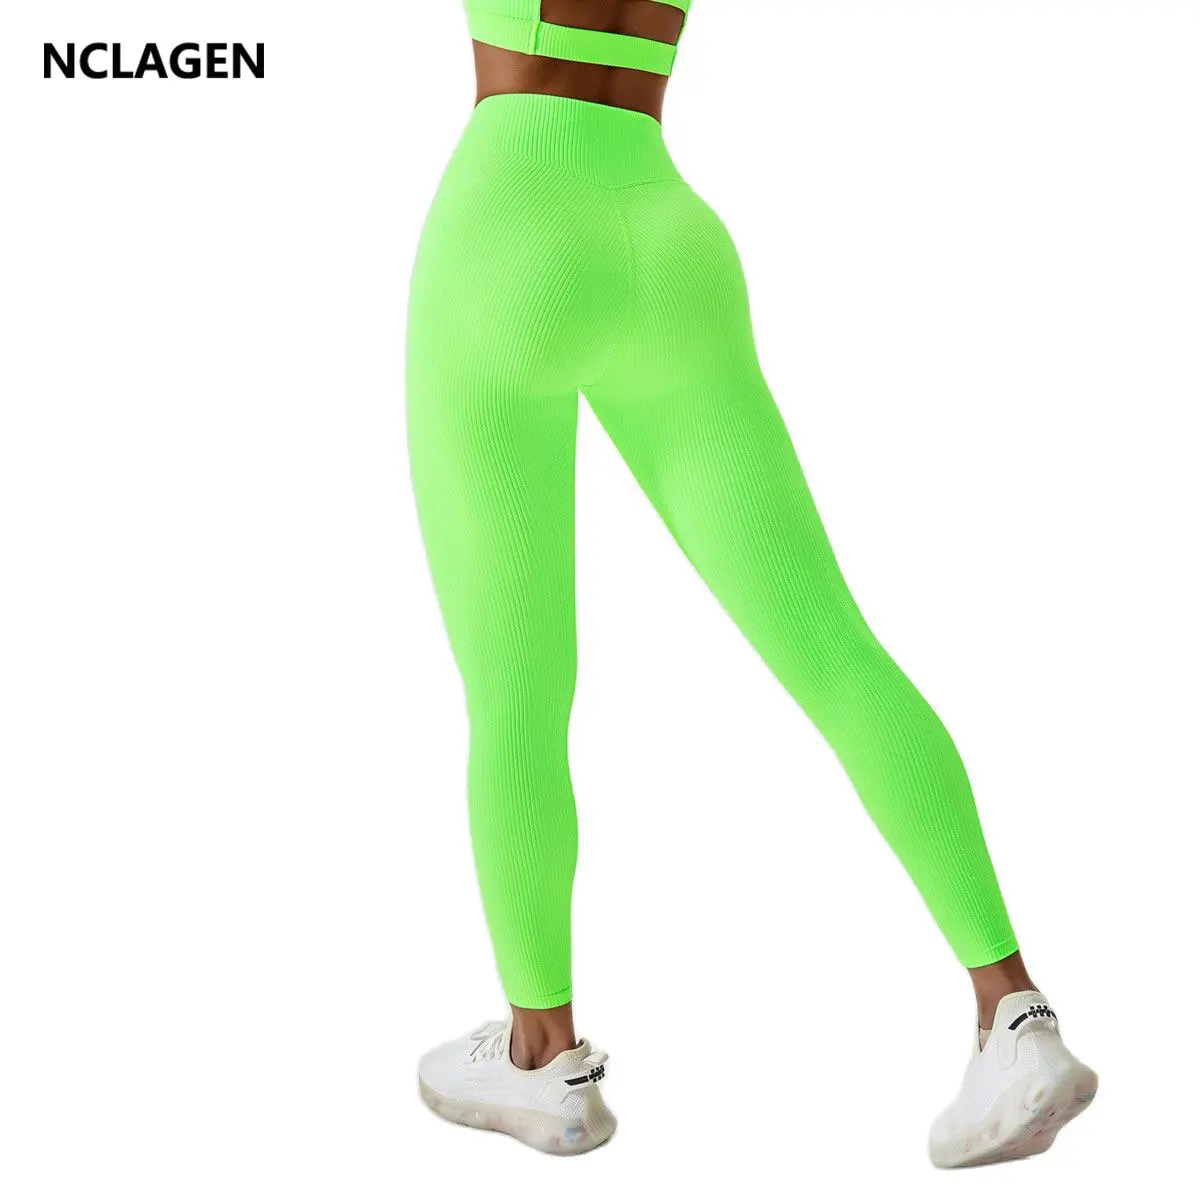 

NCLAGEN Yoga Pants Thread Tight High Waist Running Sports Gym Leggings Breathable Peach Hip Lifting Squat Proof Fitness Tights